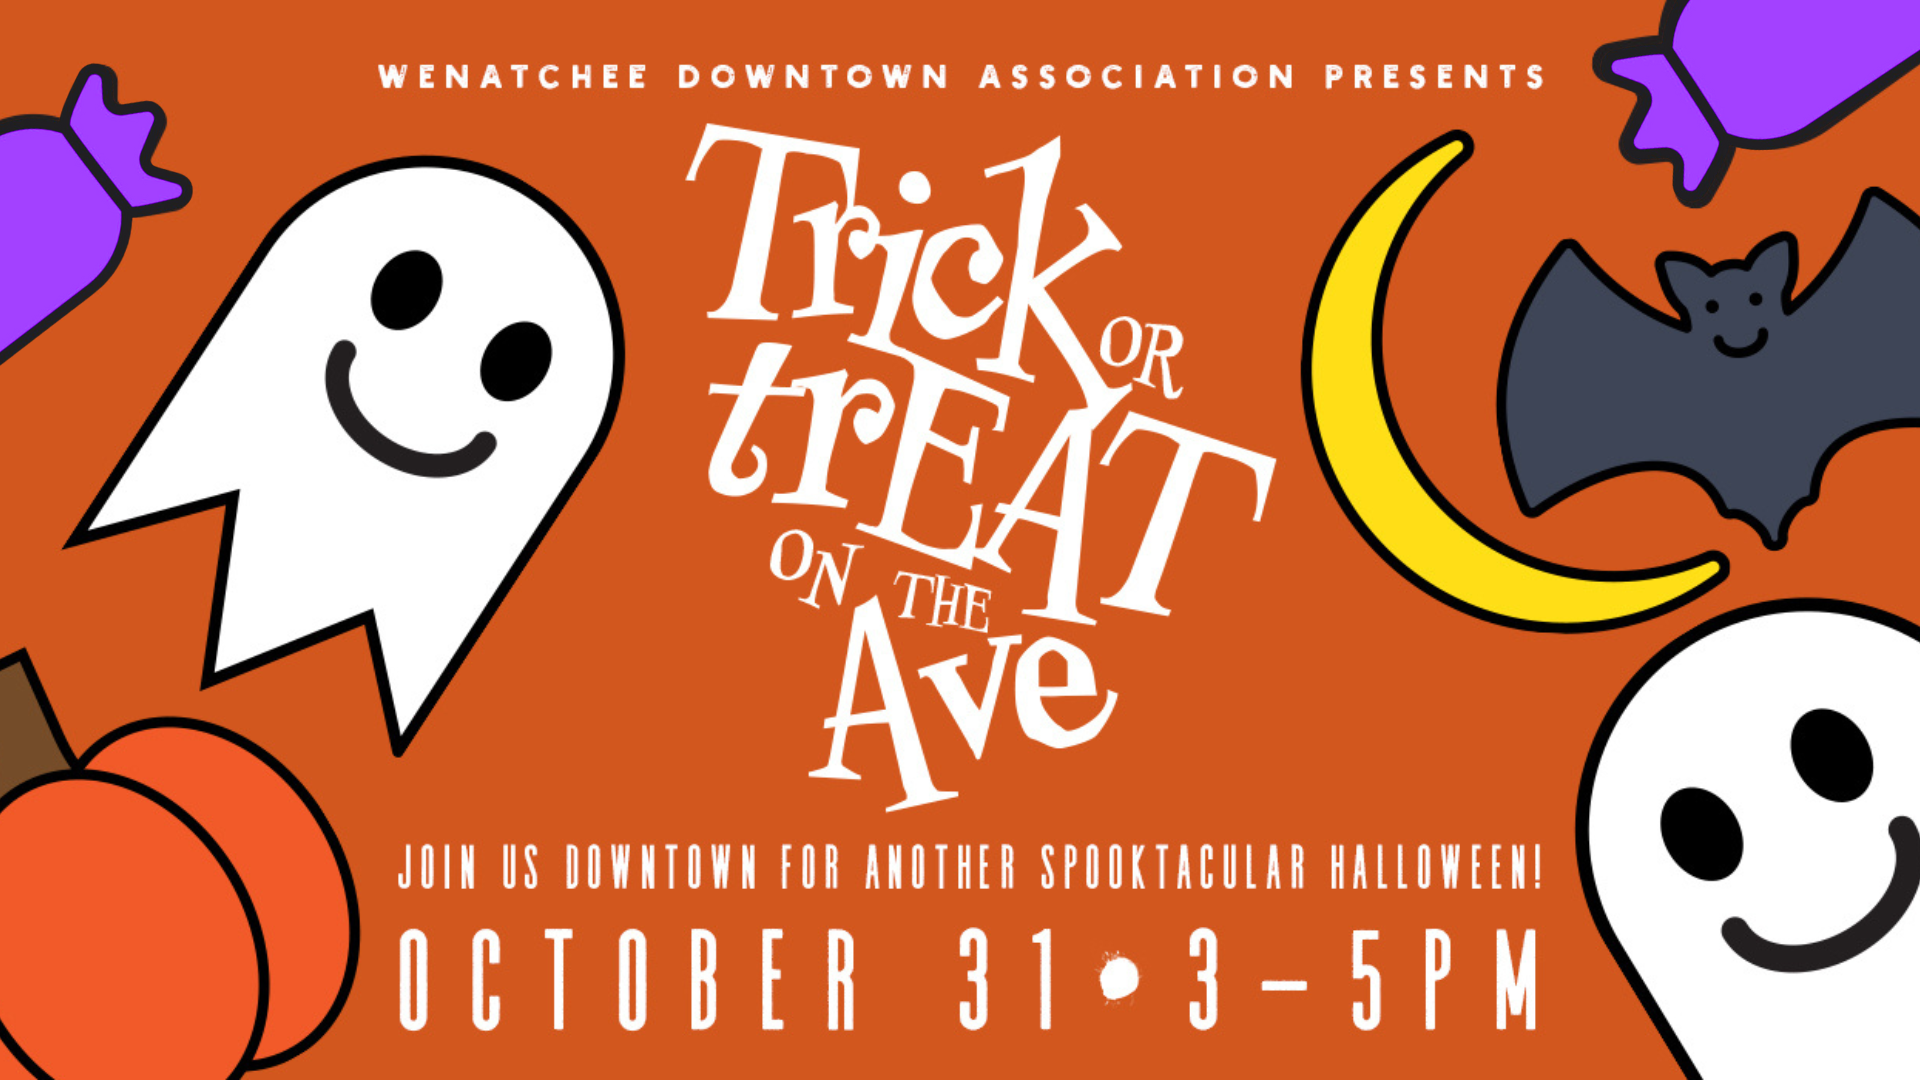 Trick-or-Treat on The Ave — Wenatchee Downtown Association